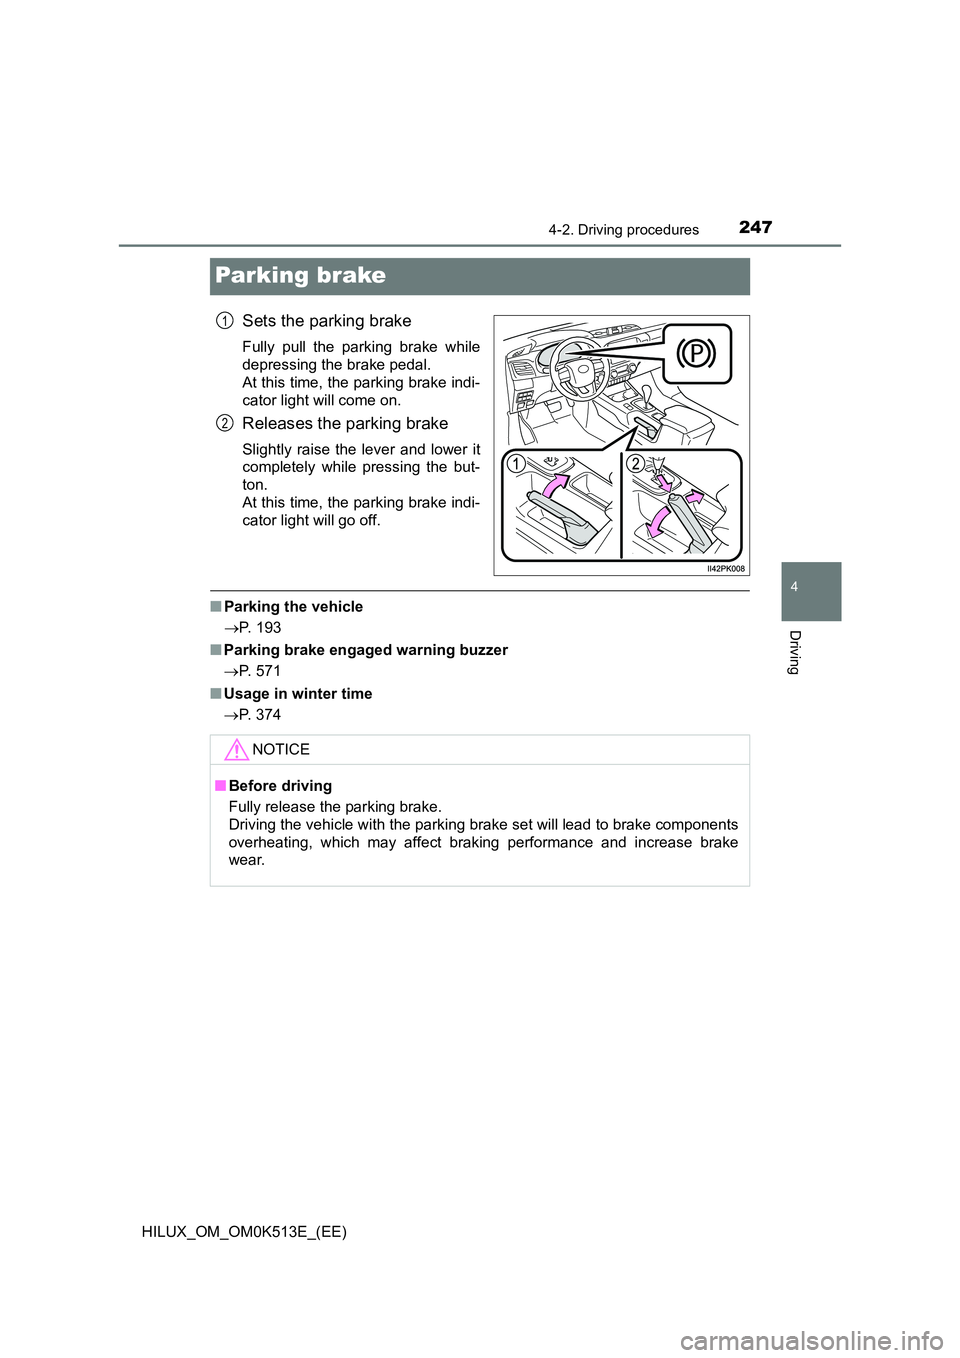 TOYOTA HILUX 2021  Owners Manual (in English) 247
4
4-2. Driving procedures
Driving
HILUX_OM_OM0K513E_(EE)
Parking brake
Sets the parking brake
Fully pull the parking brake while 
depressing the brake pedal.  
At this time, the parking brake indi